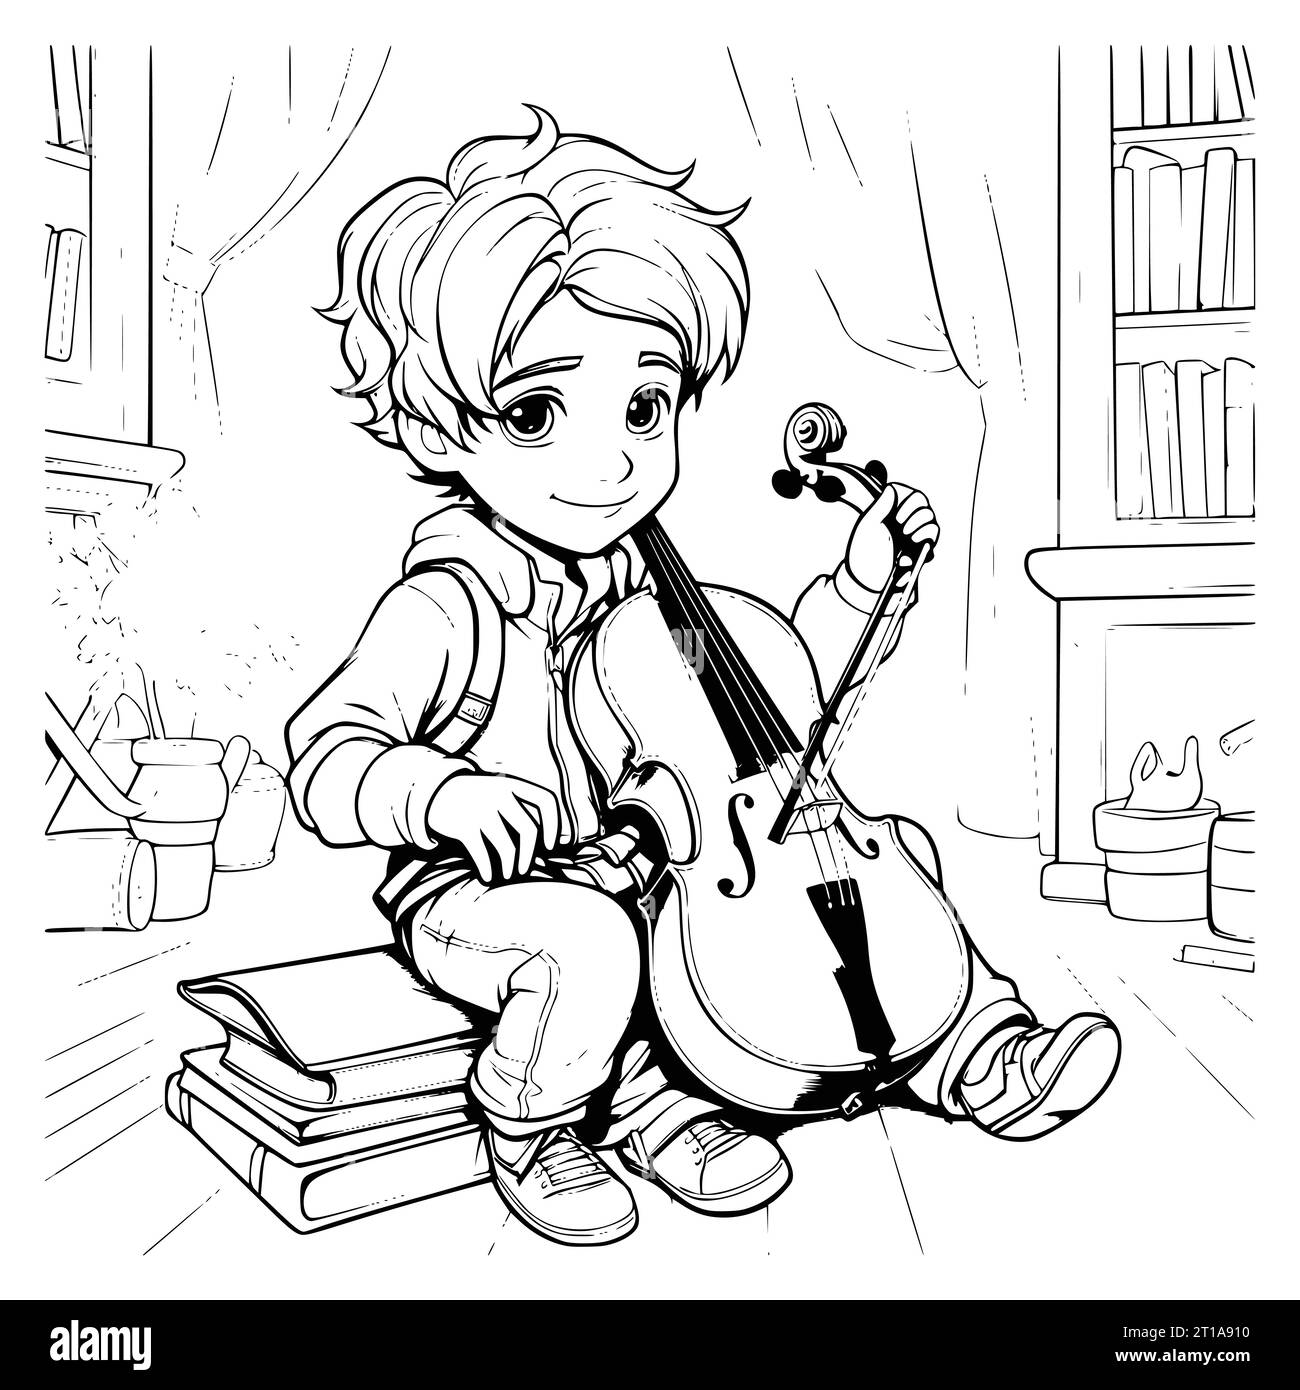 Boy Playing Violin Coloring Pages Drawing For Kids Stock Vector